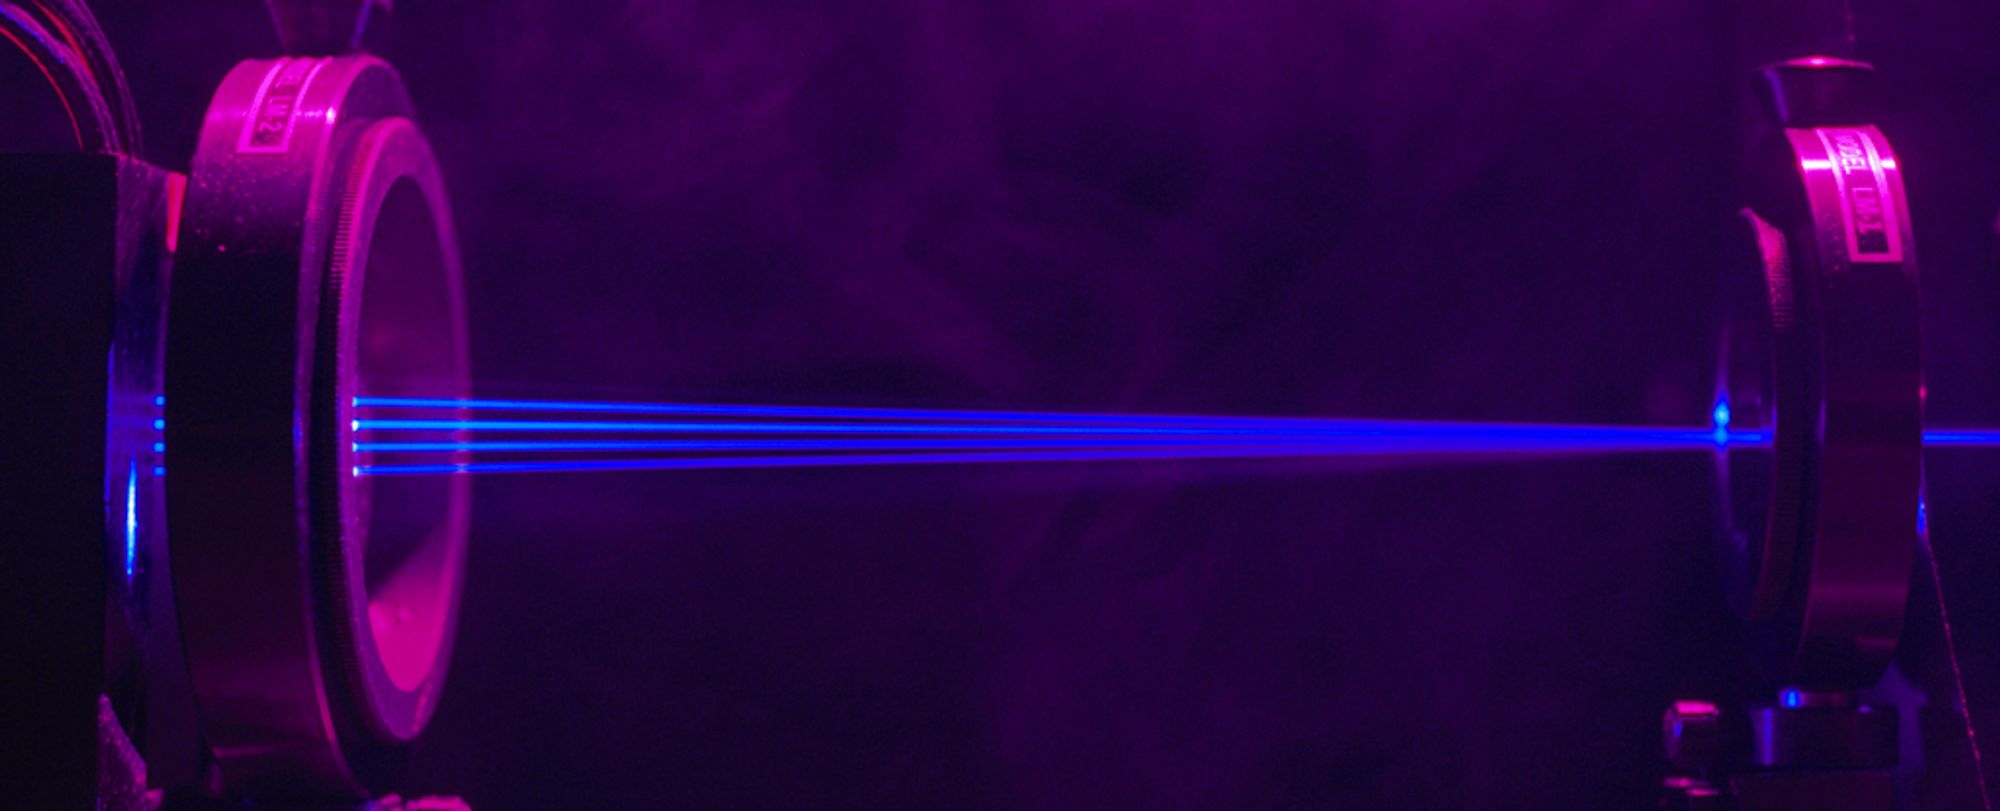 Researchers Just Wirelessly Transmitted Power Over 98 Feet of Thin Air